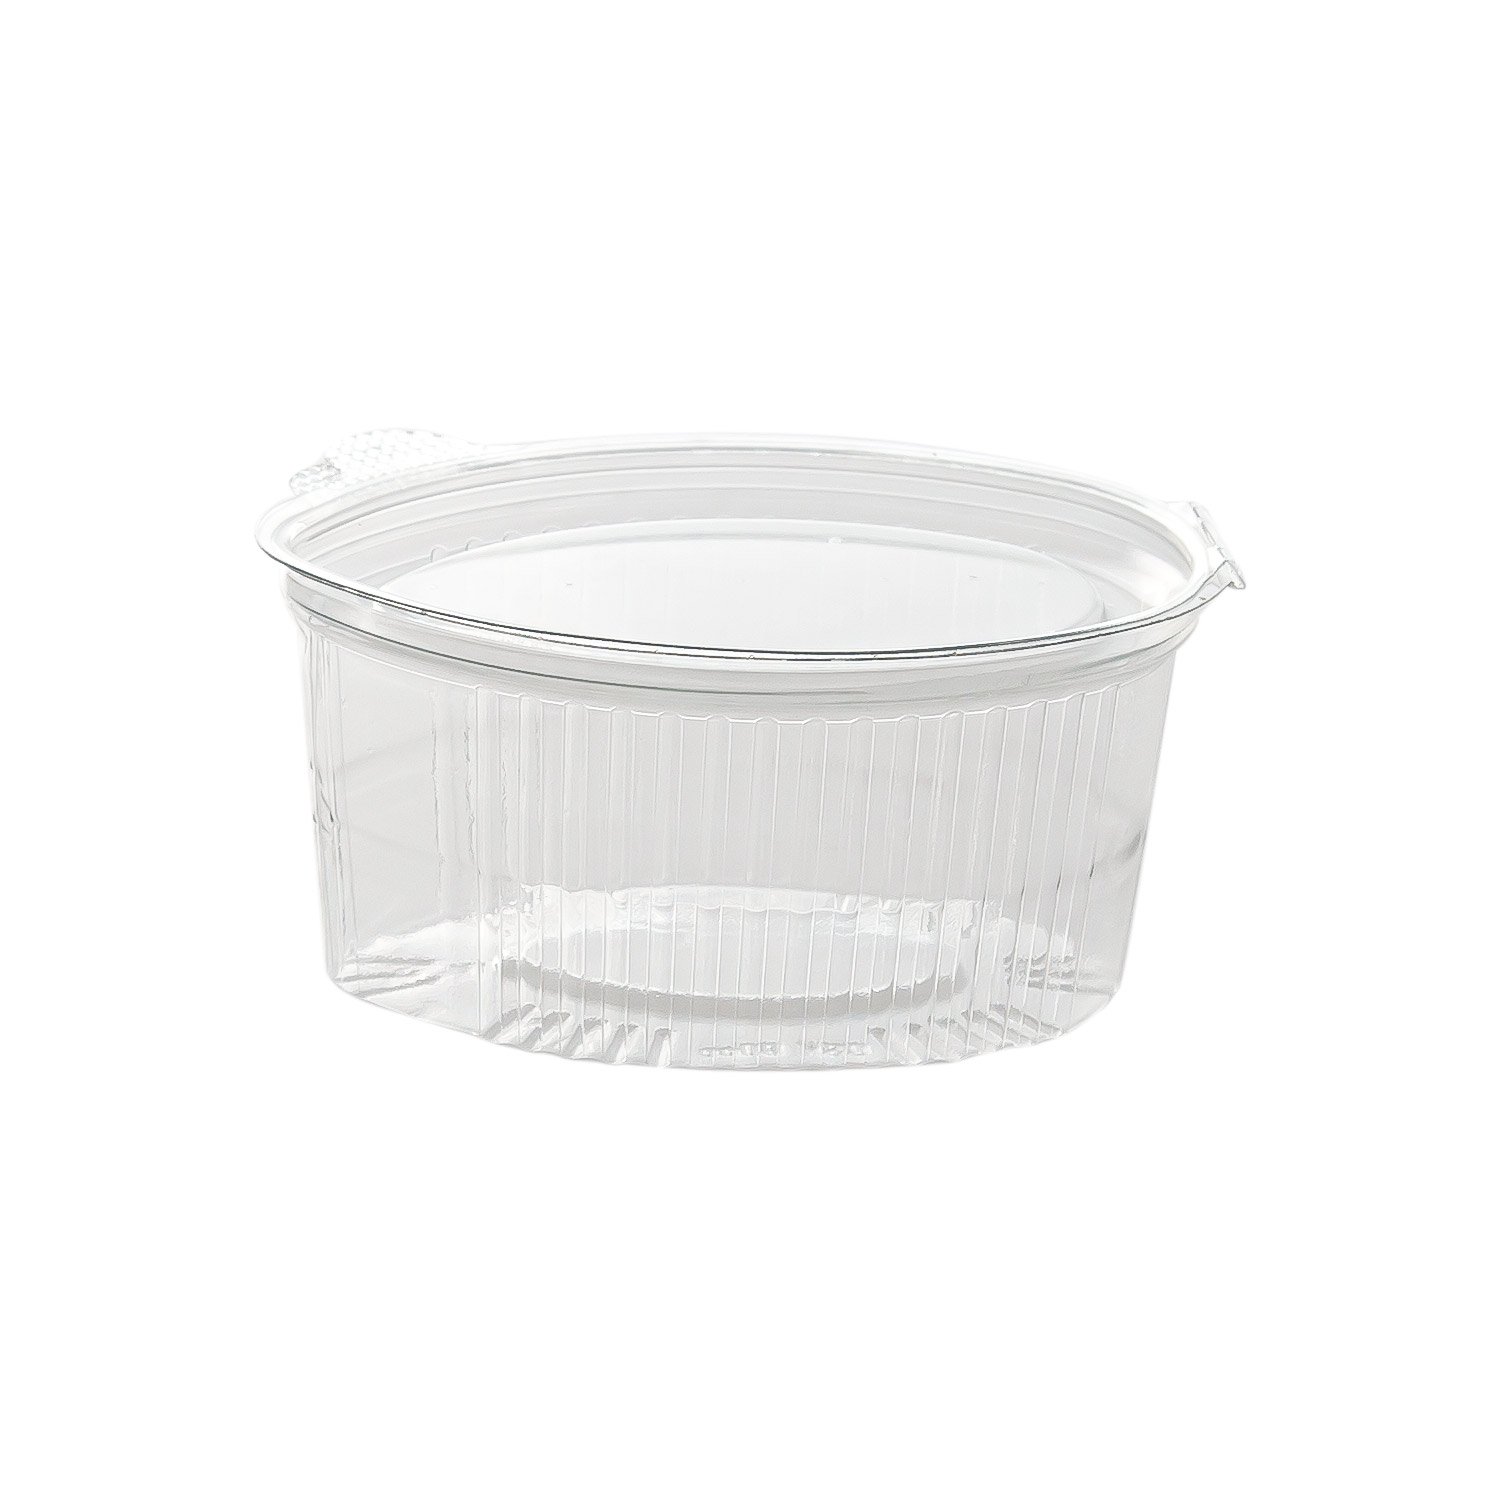 Souffle Container with Hinge Lid (Clear, Oval Shape)